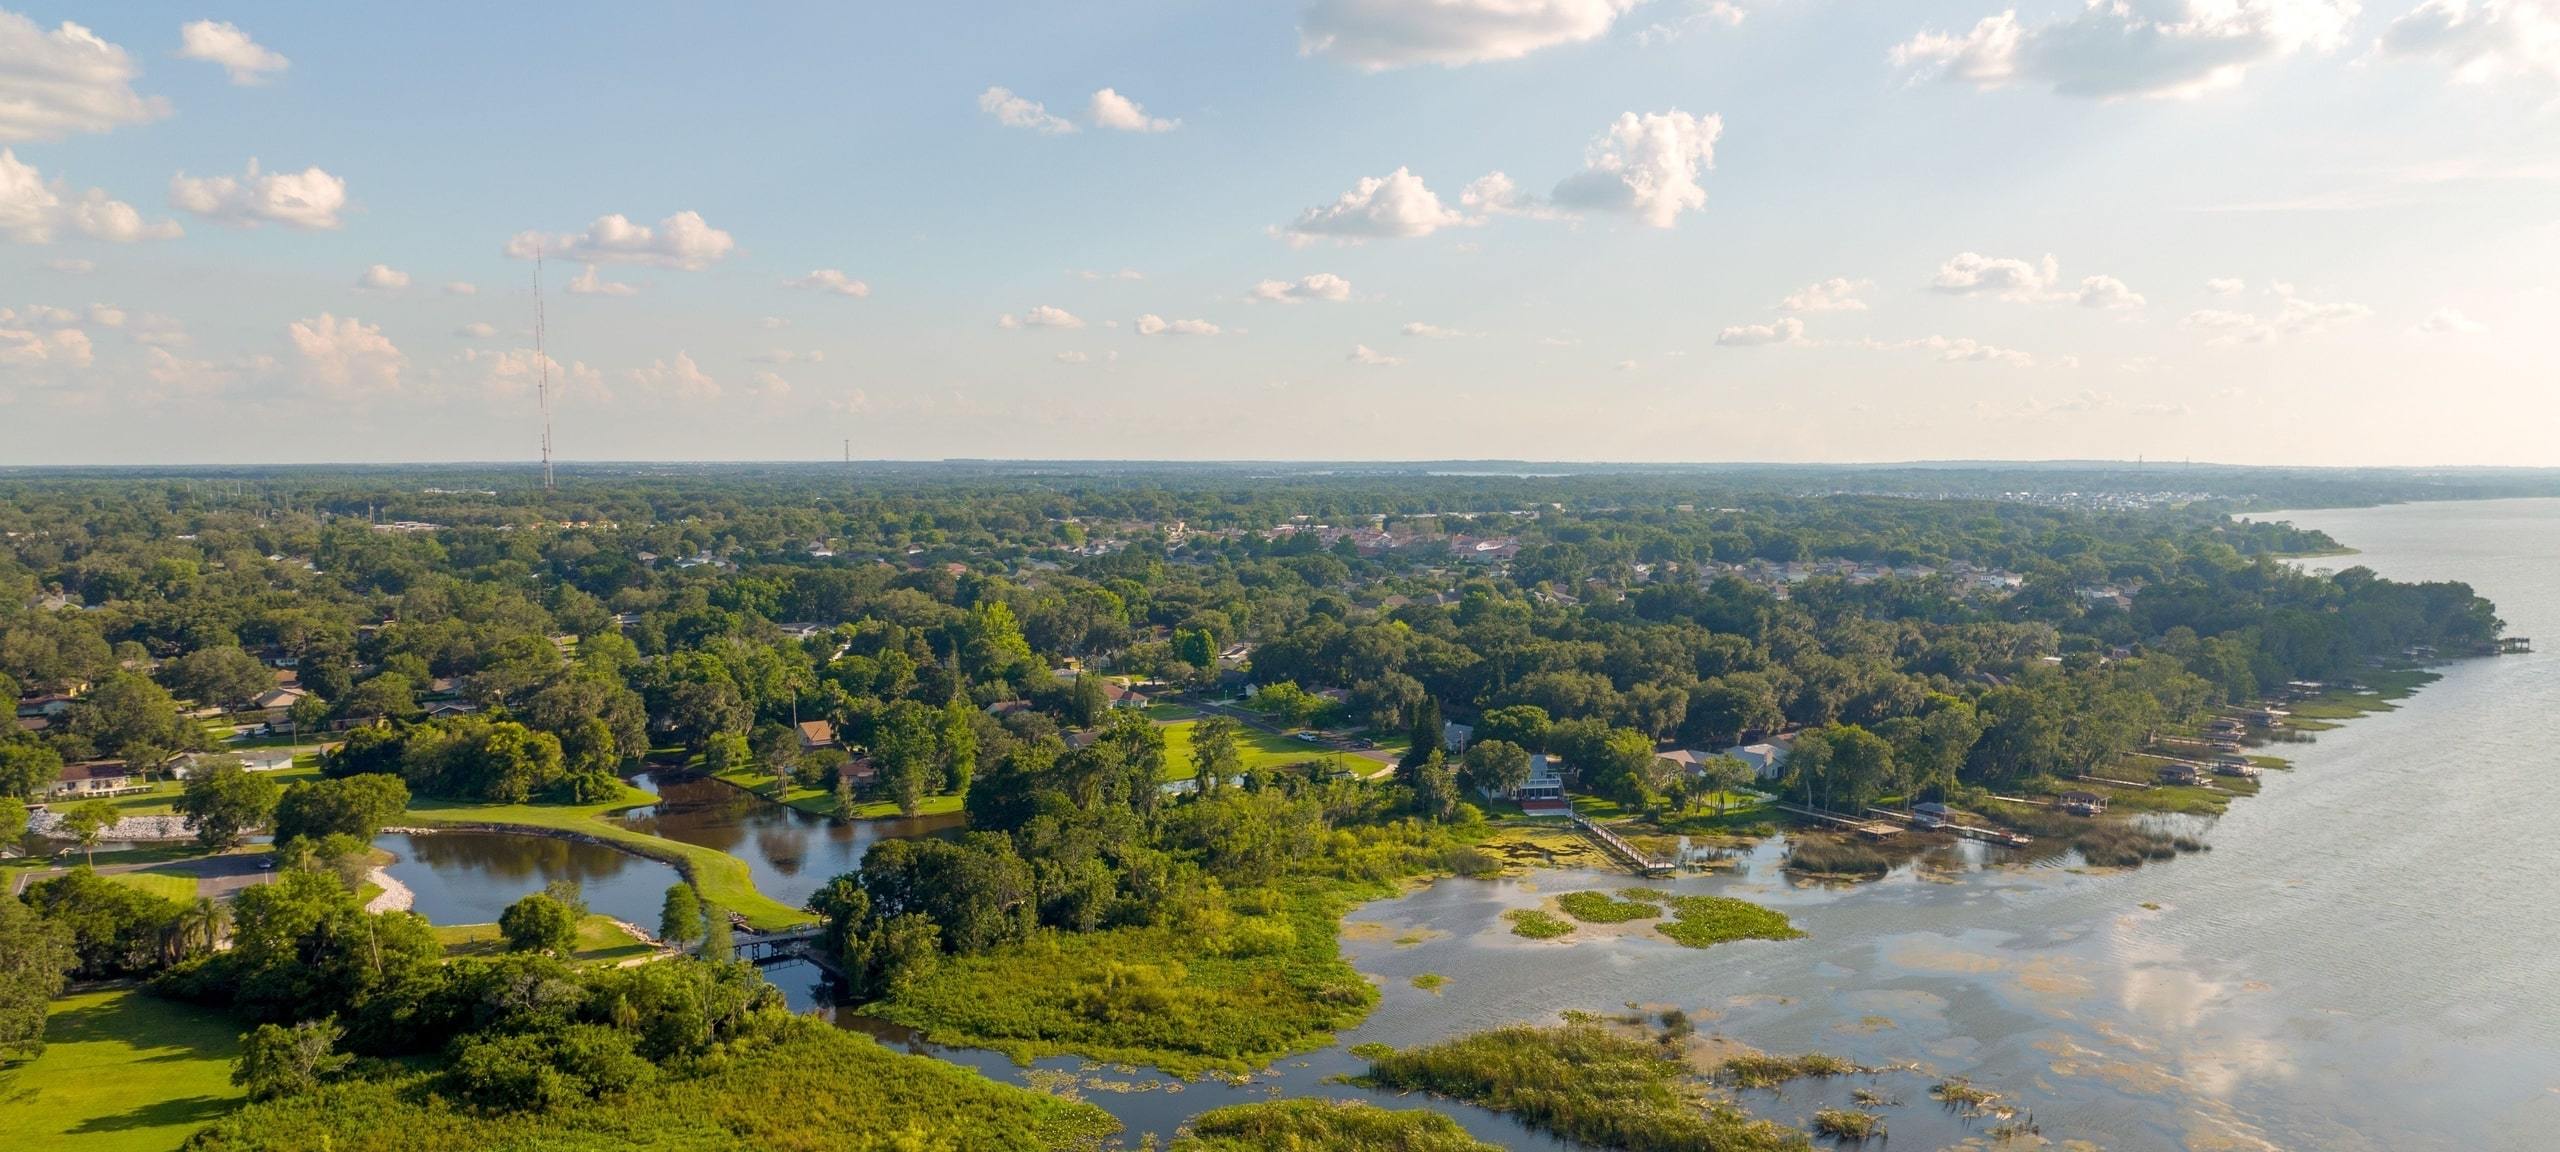 Aerial view of Lakeview Park in Winter Garden, FL